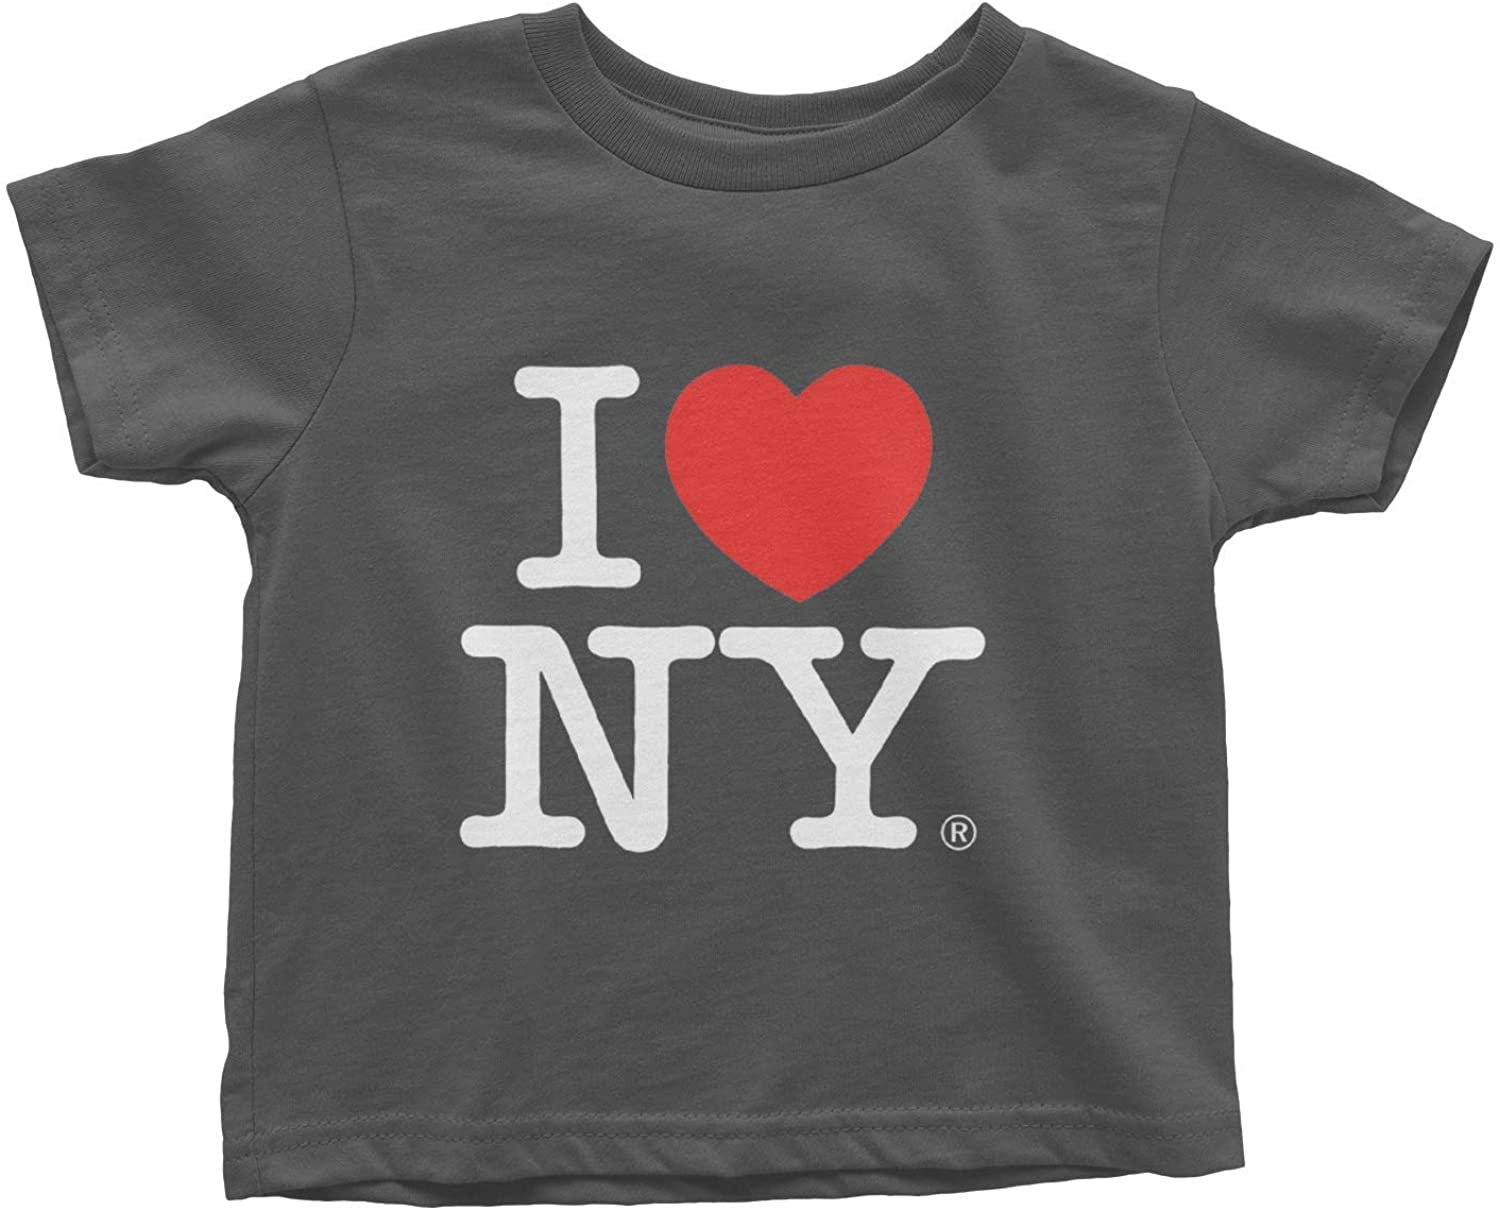 Ich liebe NY Baby T-Shirt Holzkohle